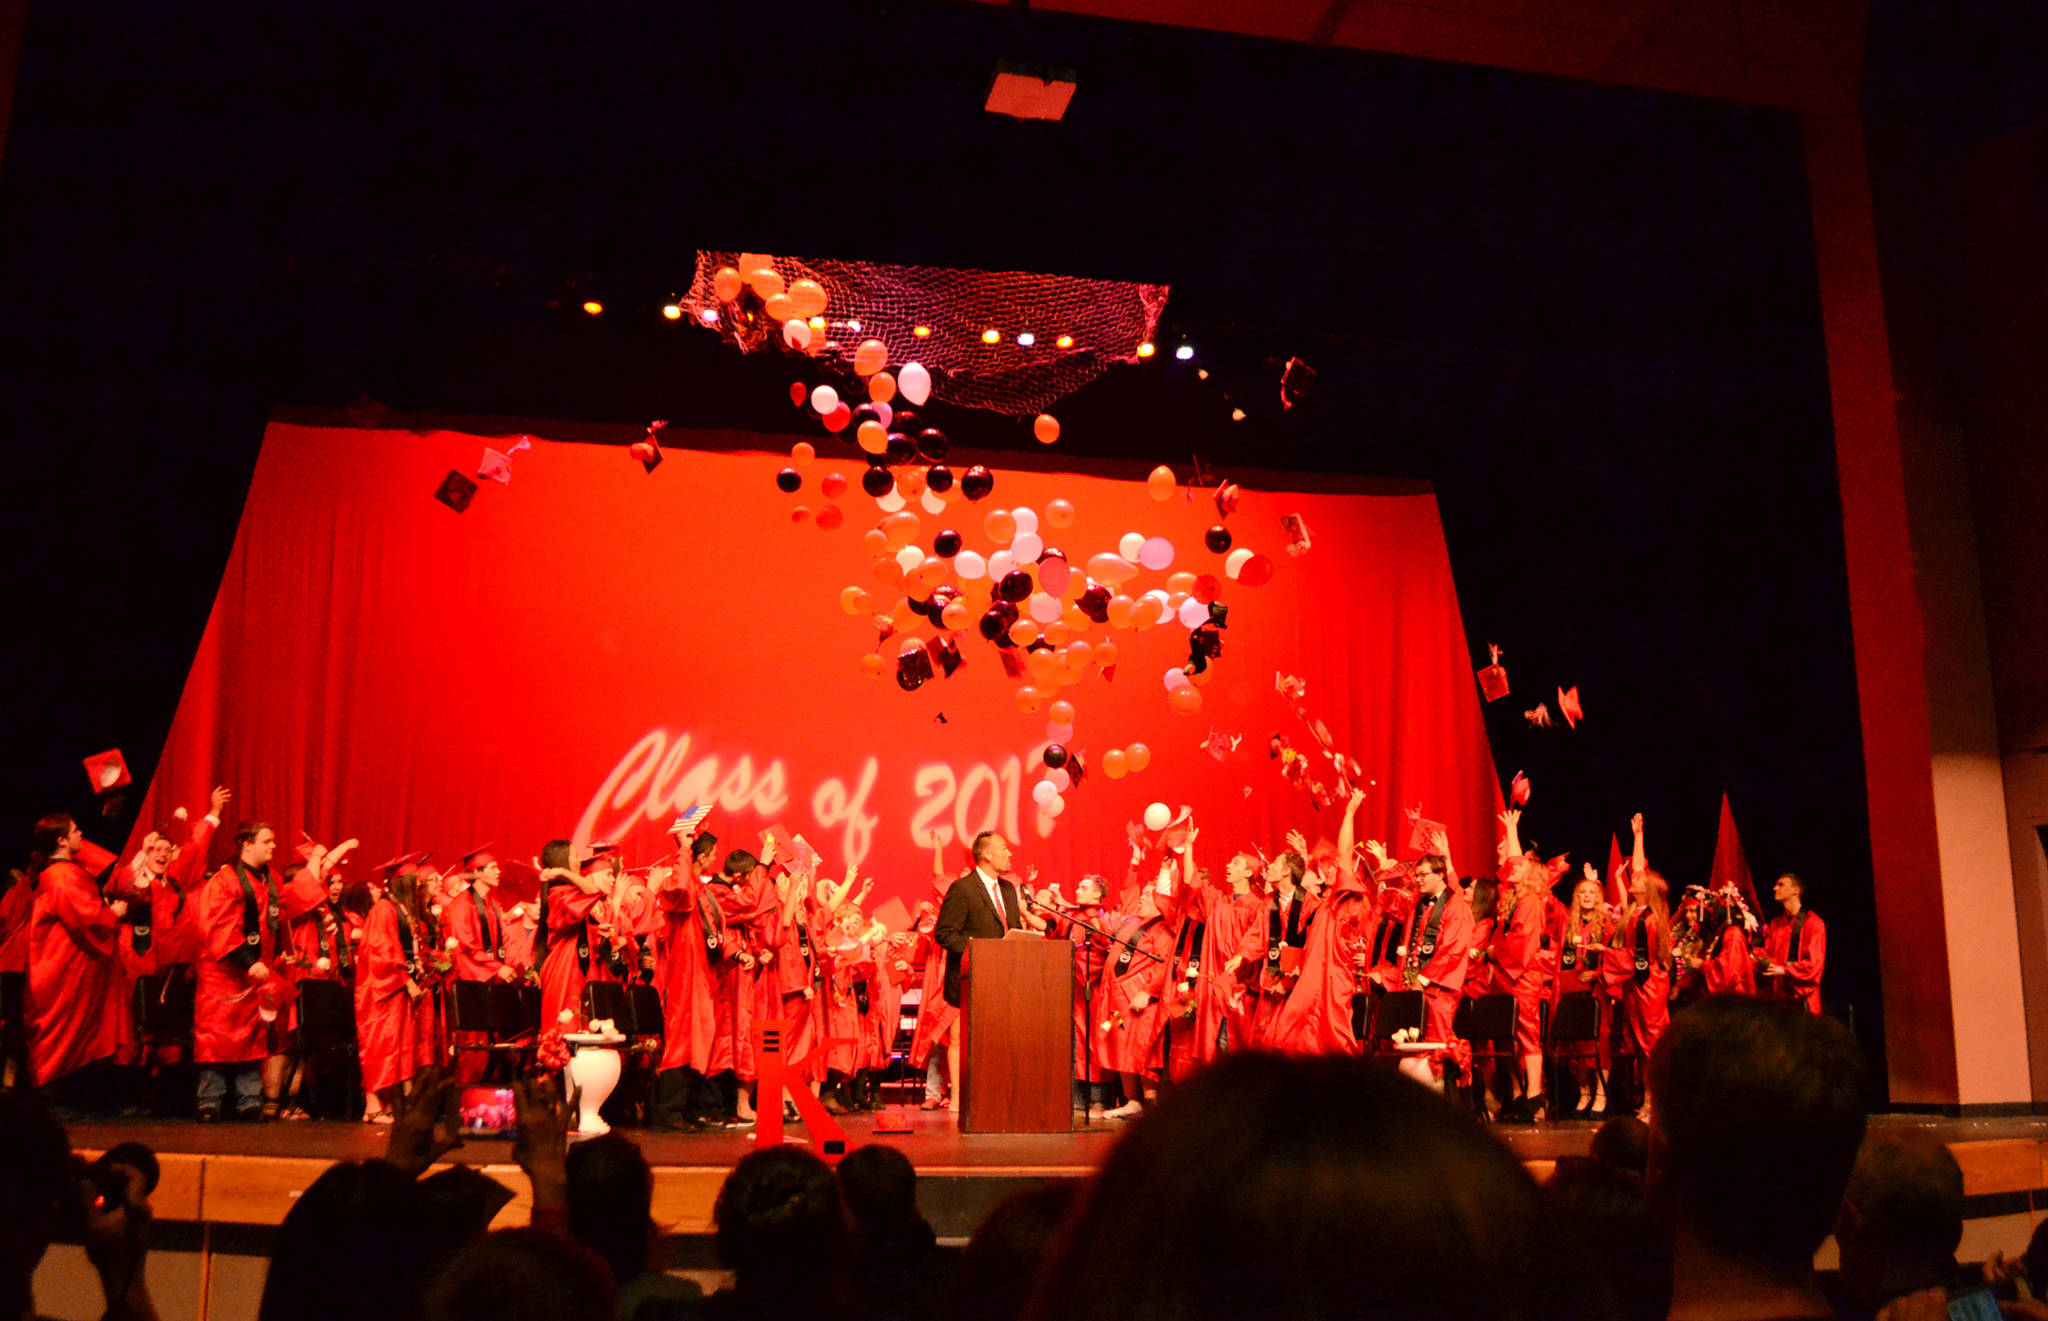 Students in Kenai Central High School’s graduating class of 2017 toss their caps in the air at the end of their commencement ceremony Wednesday, May 24, 2017 at the Renee C. Henderson Auditorium in Kenai, Alaska. (Photo courtesy Beth Ulricksen/Peninsula Clarion)